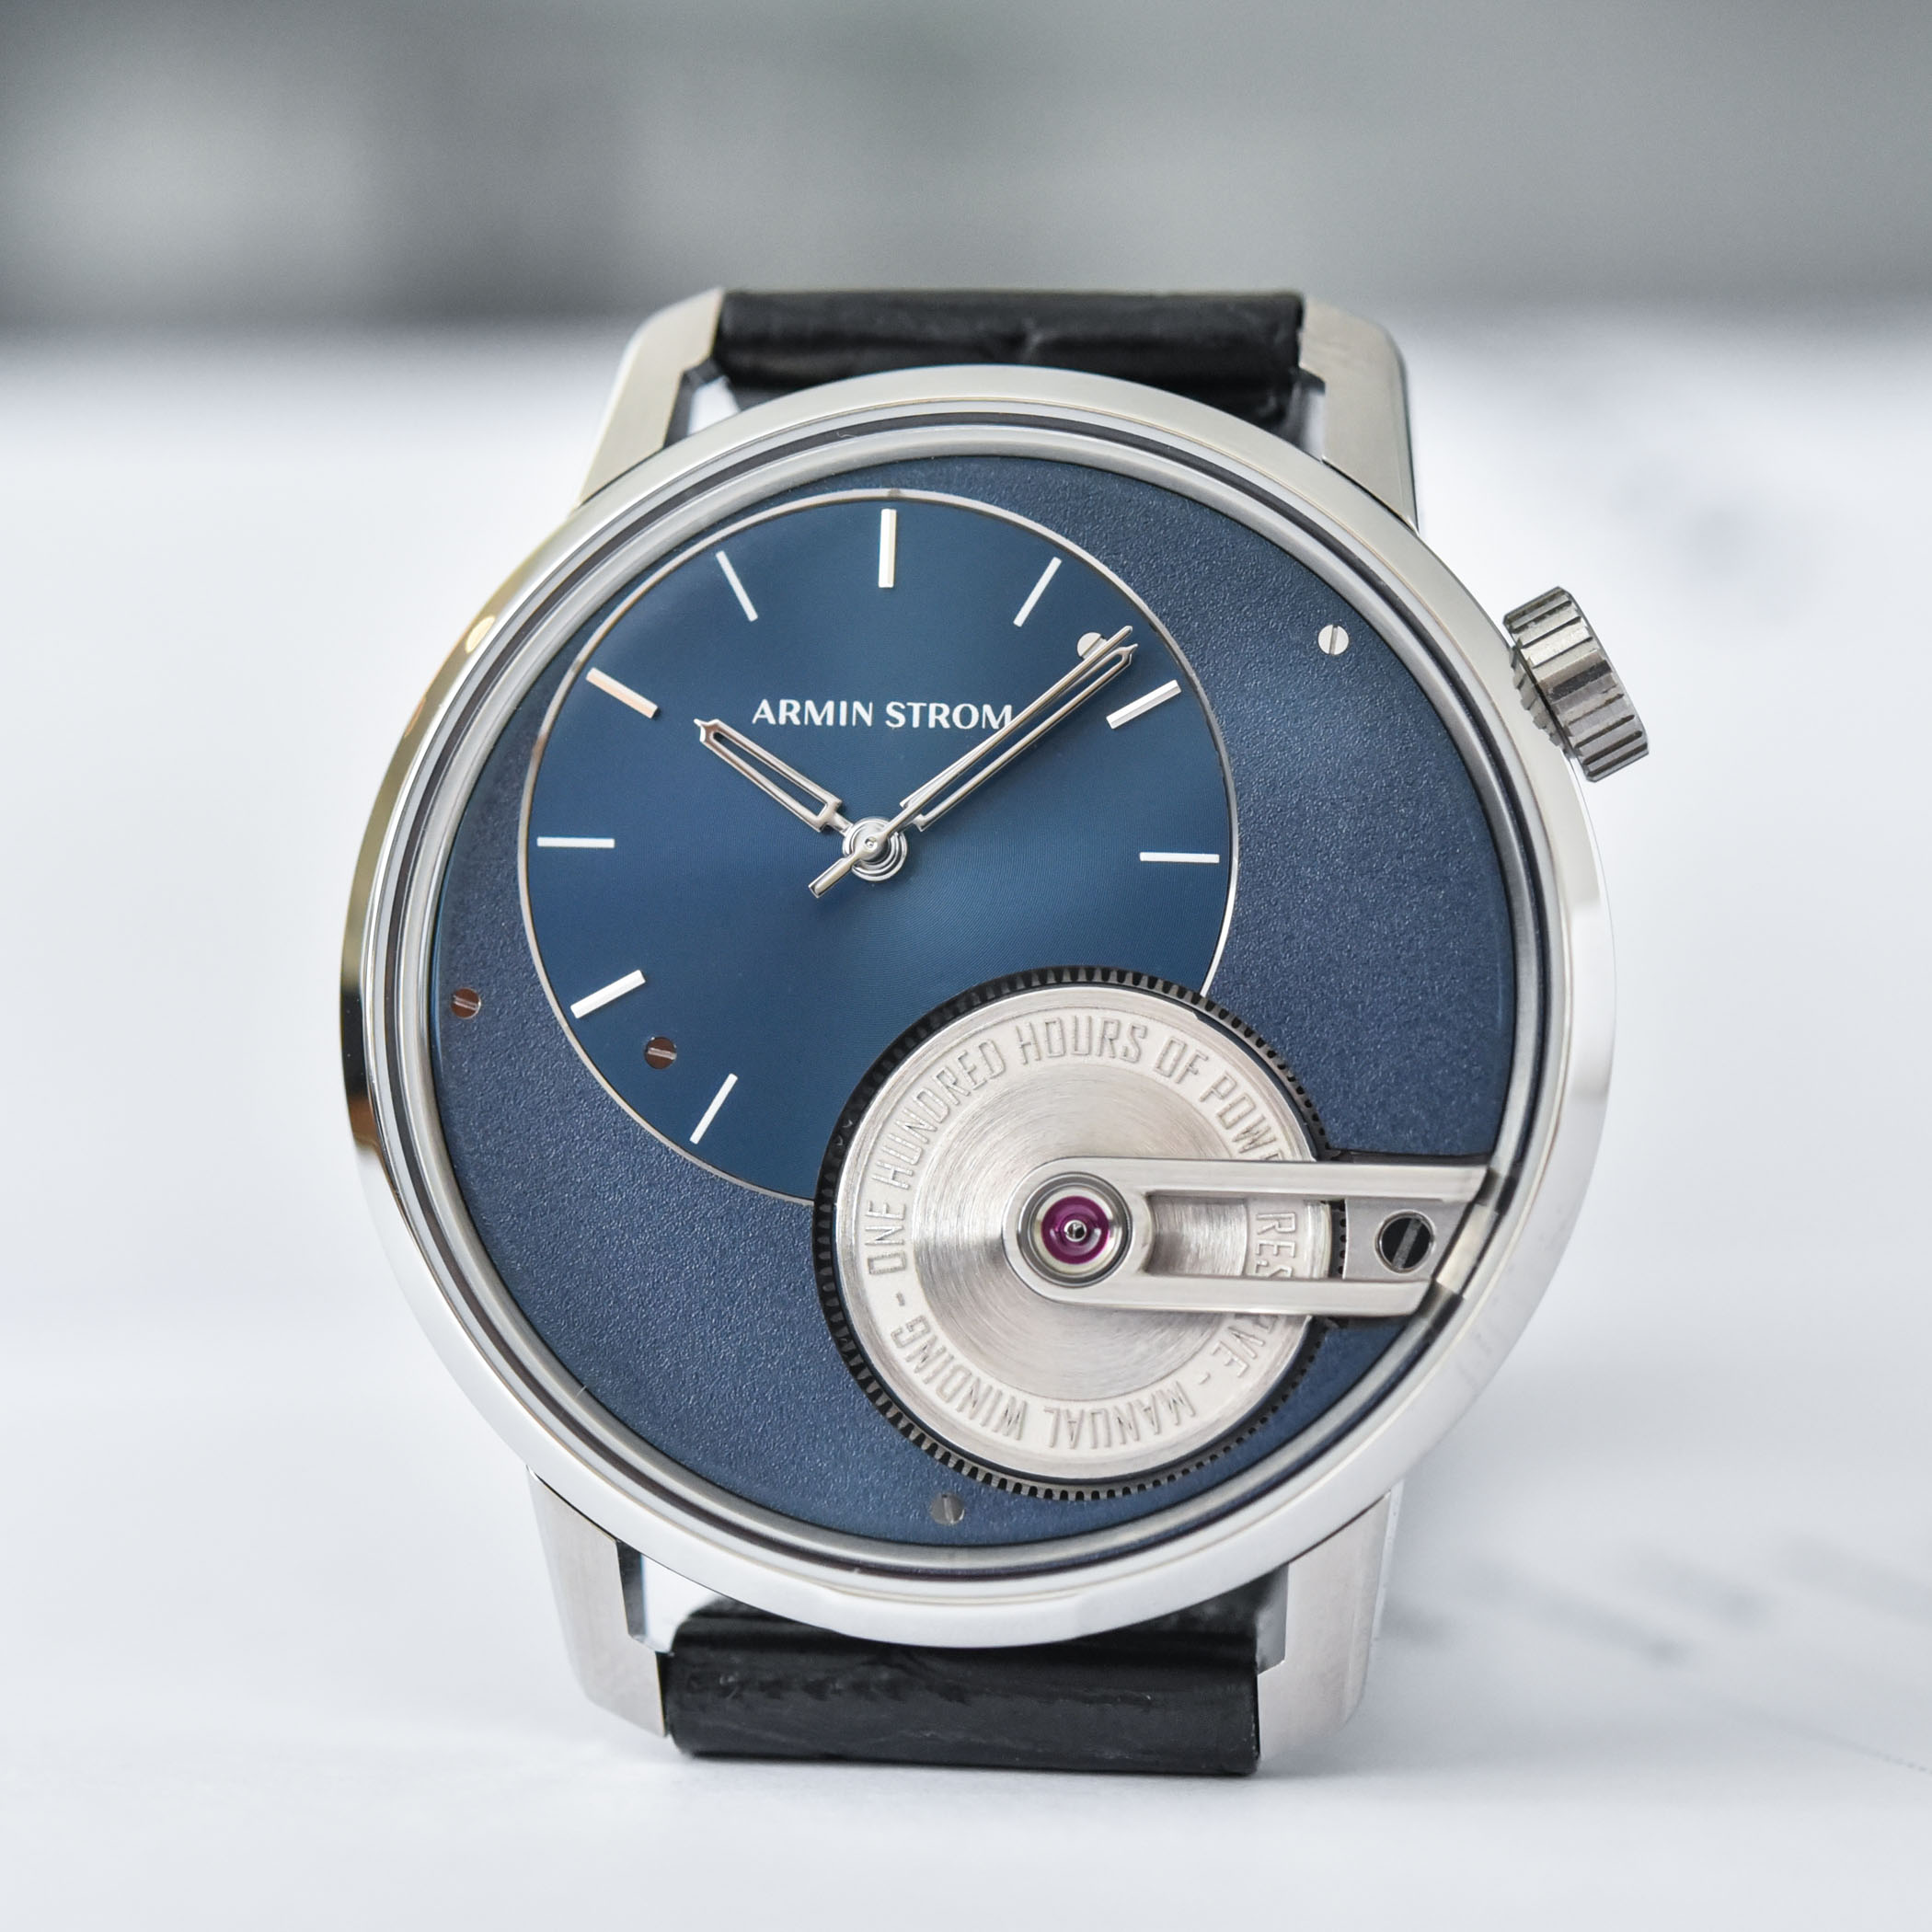 Armin Strom Tribute 1 Limited Edition blue